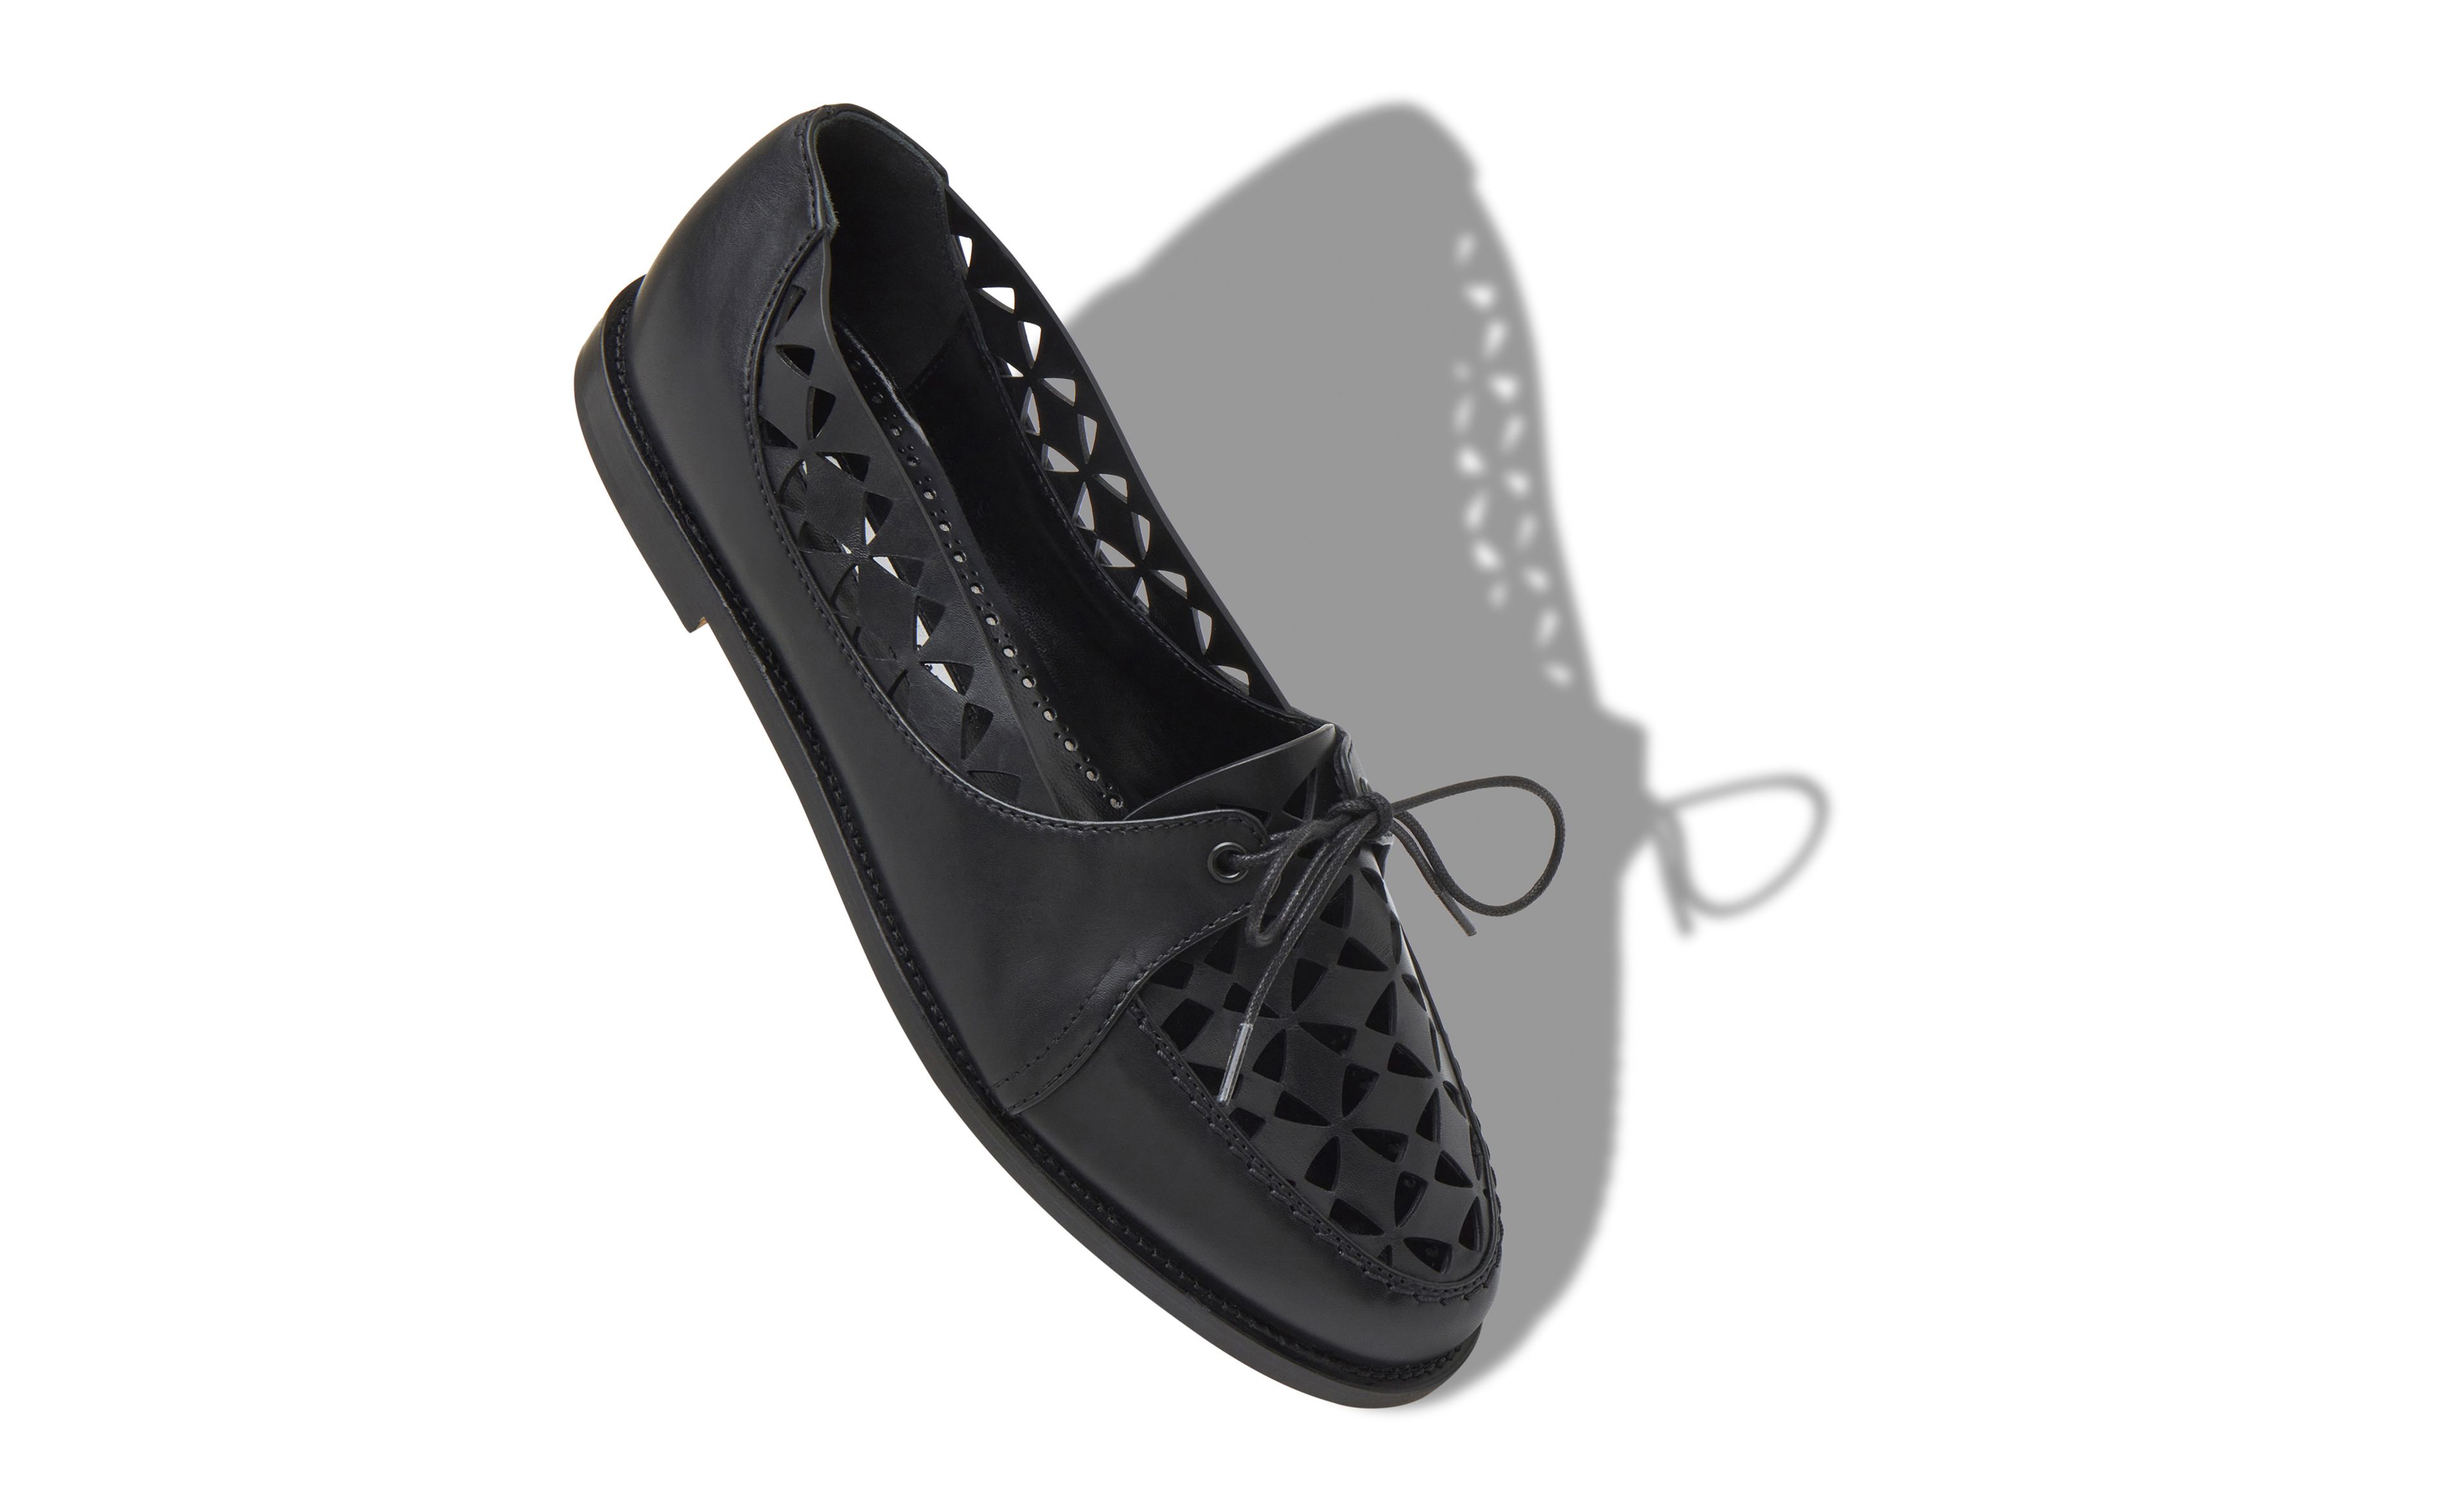 Manolo Blahnik Delirium Perforated Leather Lace-Up Loafers